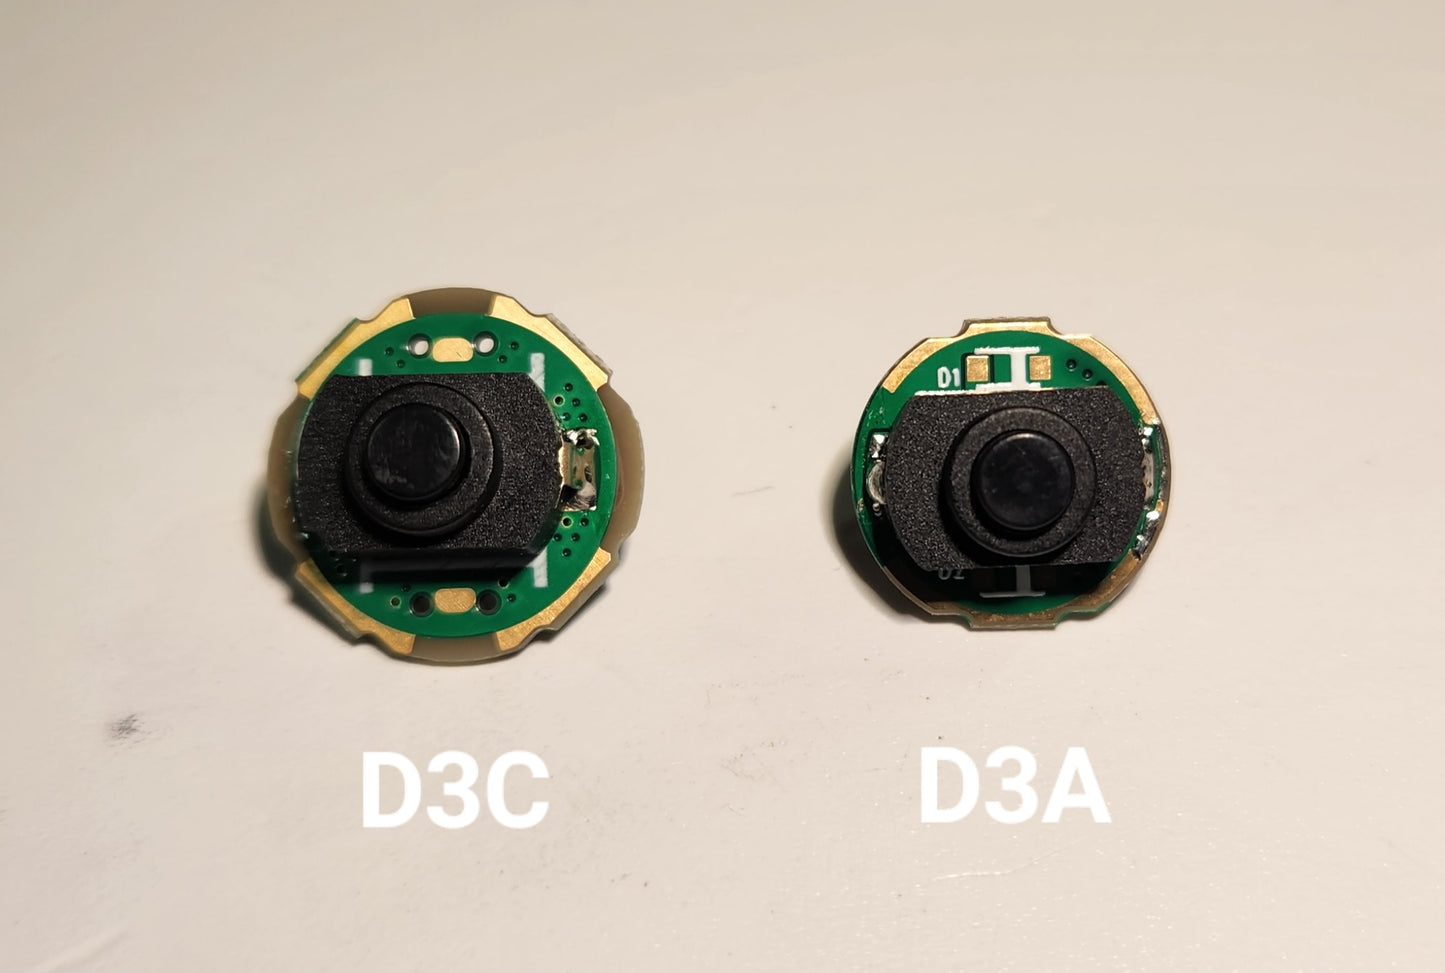 EAGTAC D3C D3A Replacement Rear Clicky Switch